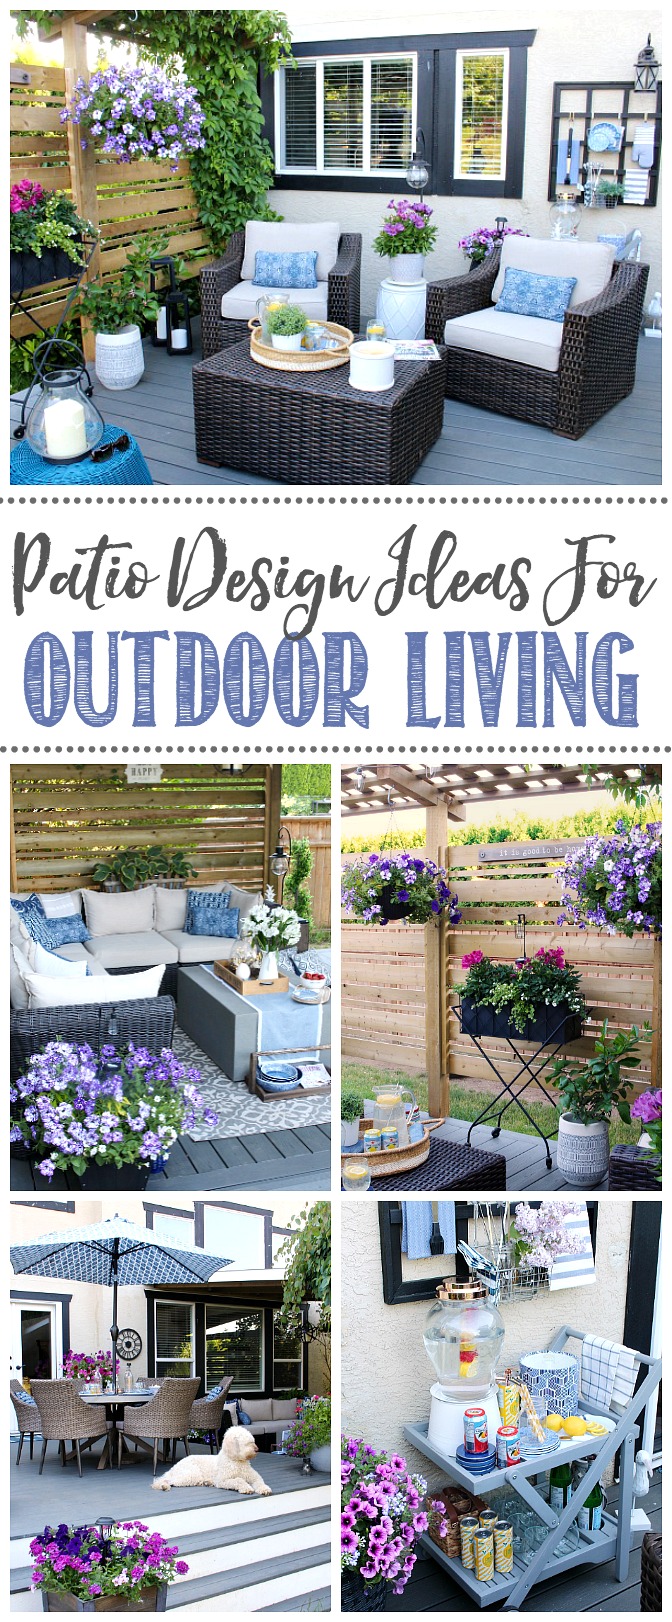 Pretty backyard patio design with resin wicker patio furniture and neutral and blue decor.